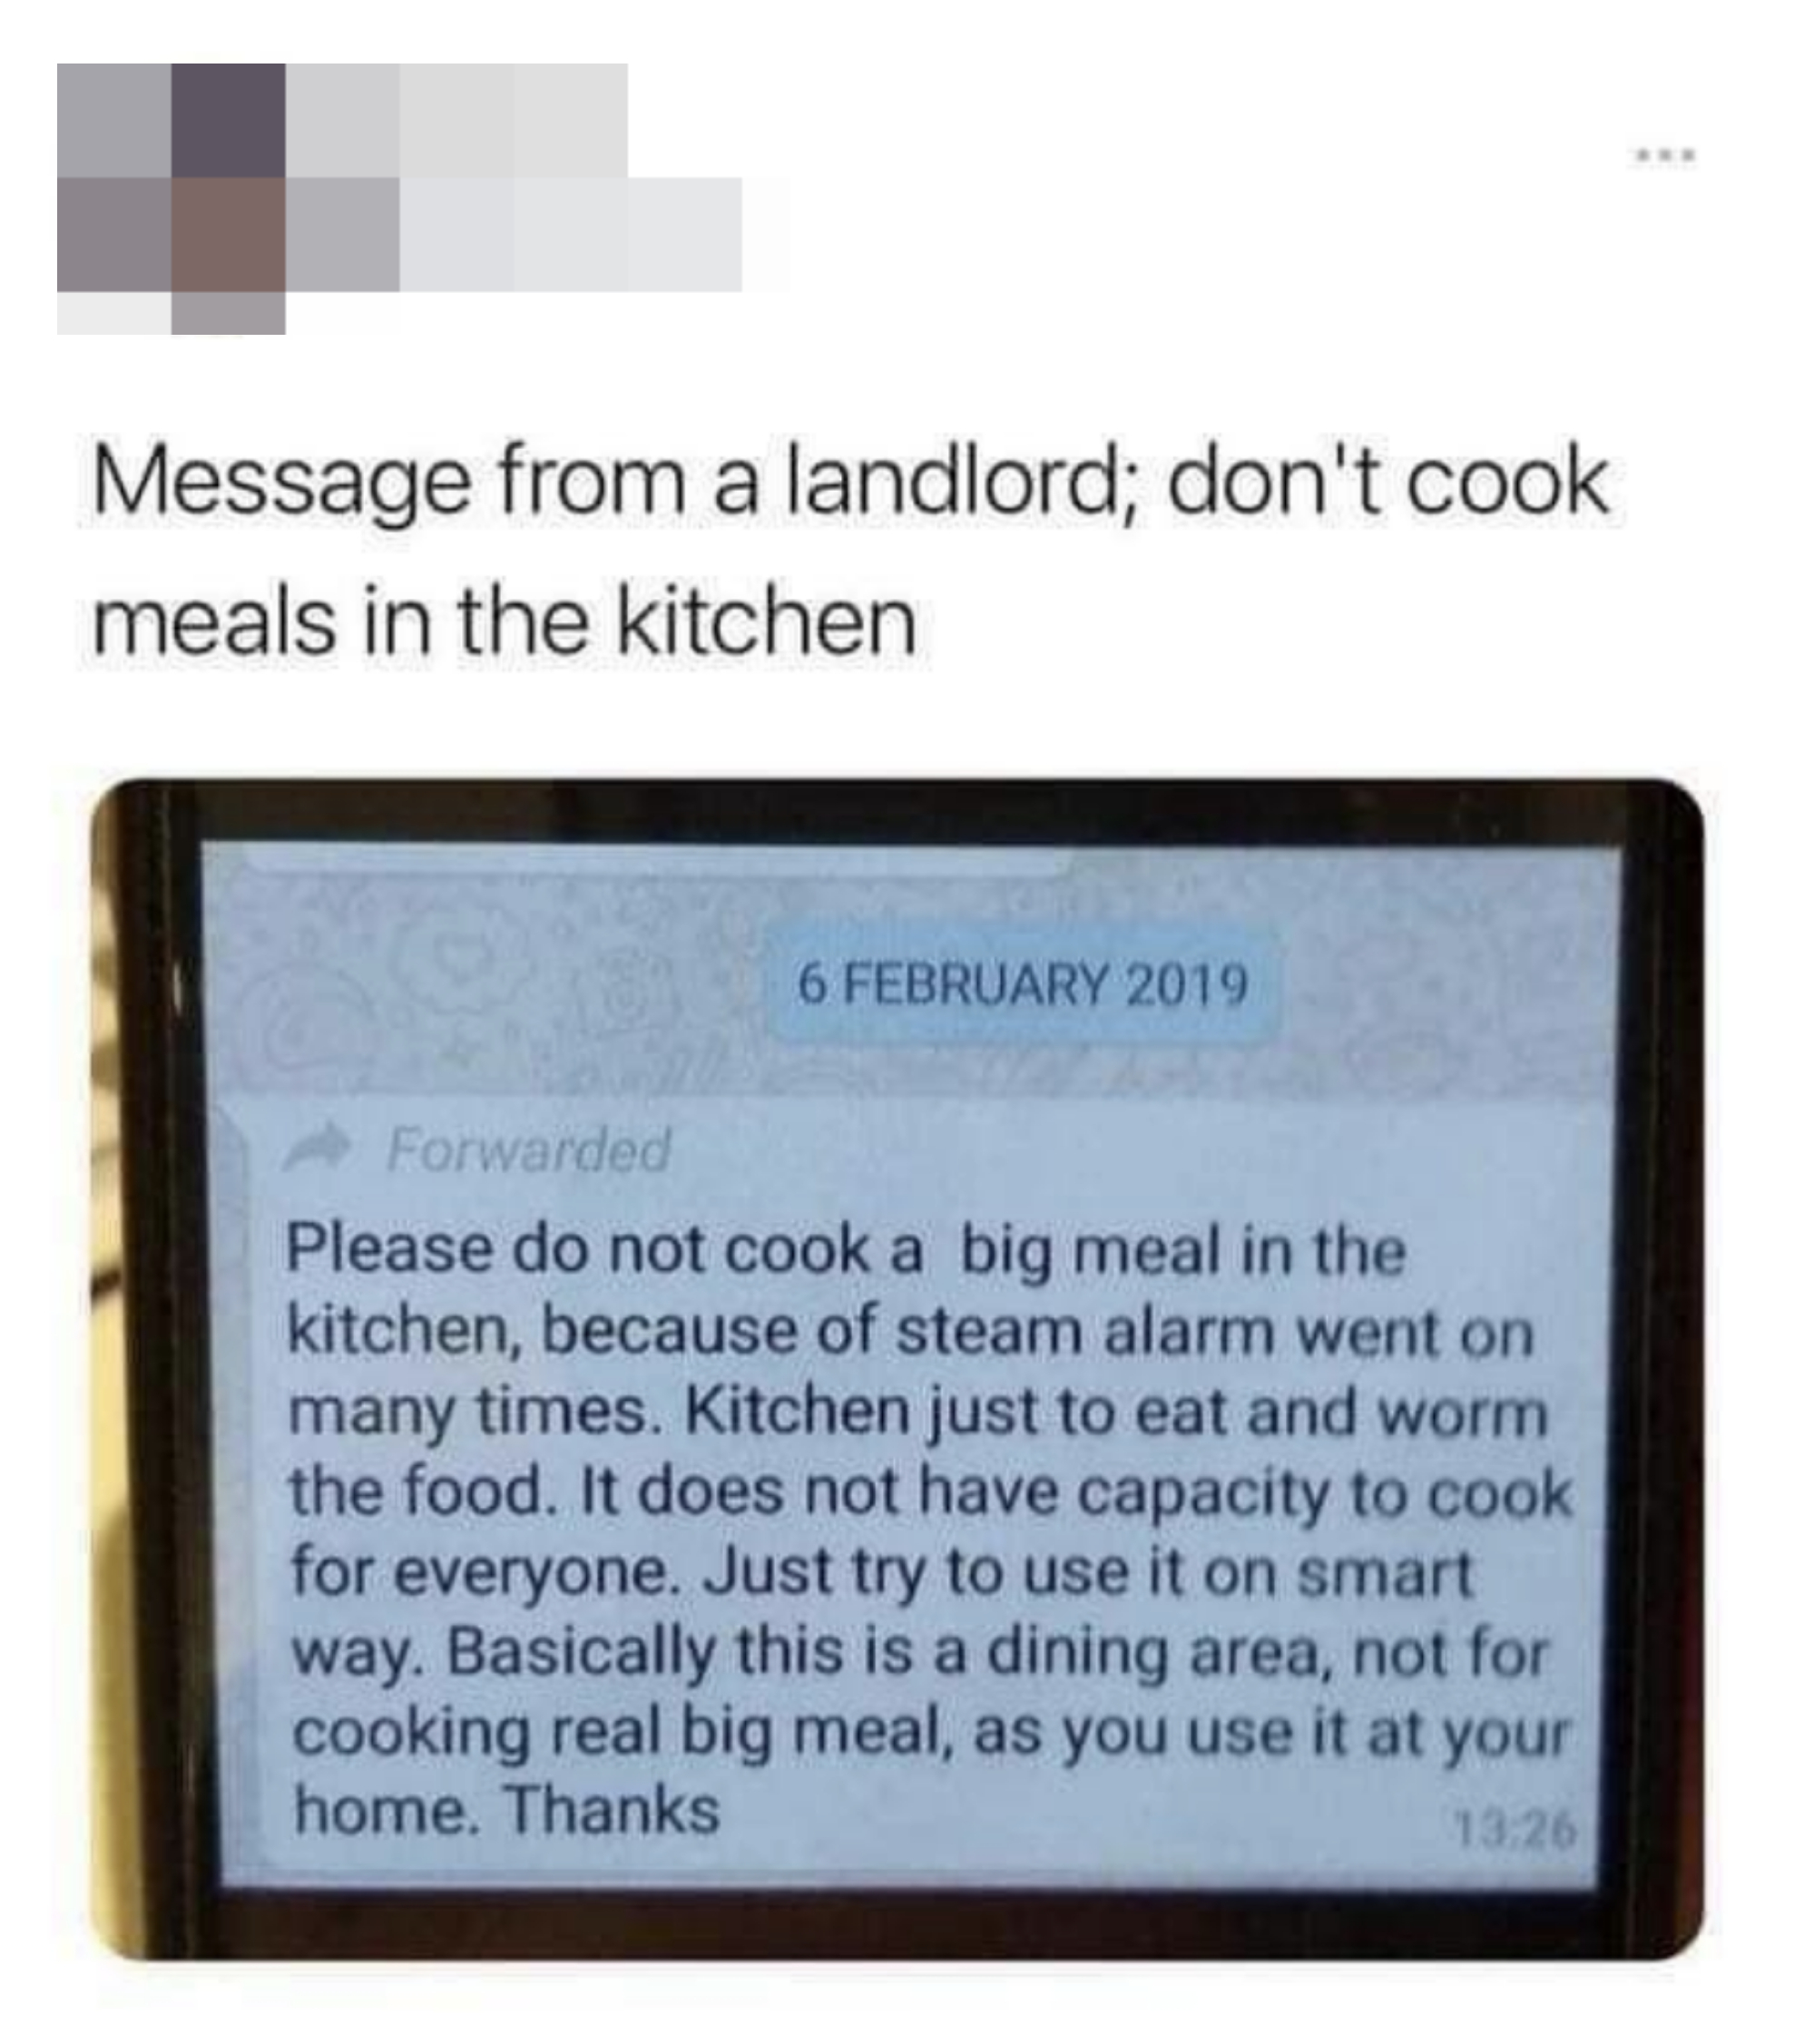 the message from the landlord